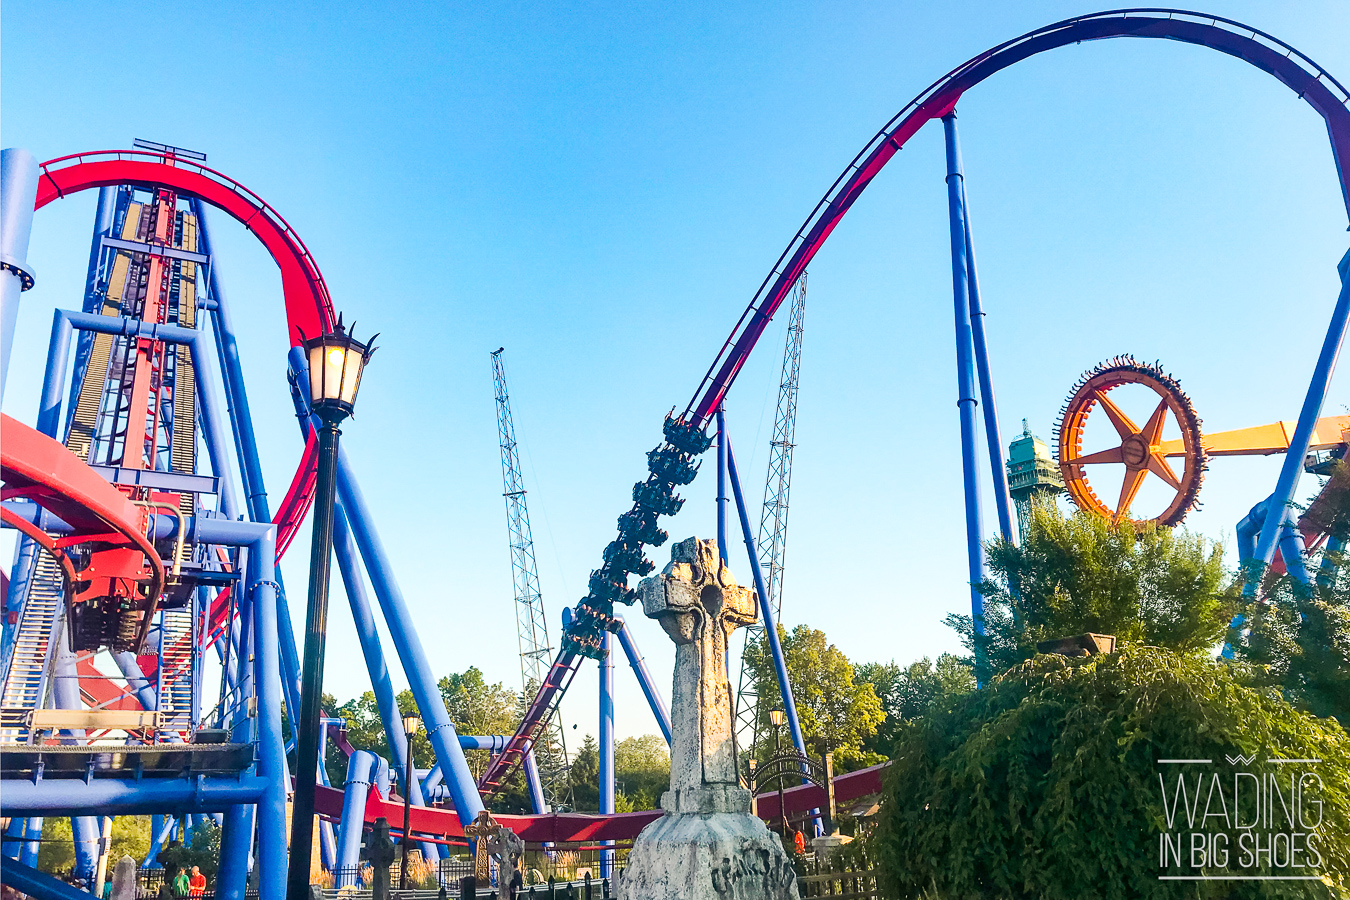 Just How Scary Are The Roller Coasters at Kings Island? Ride Guide